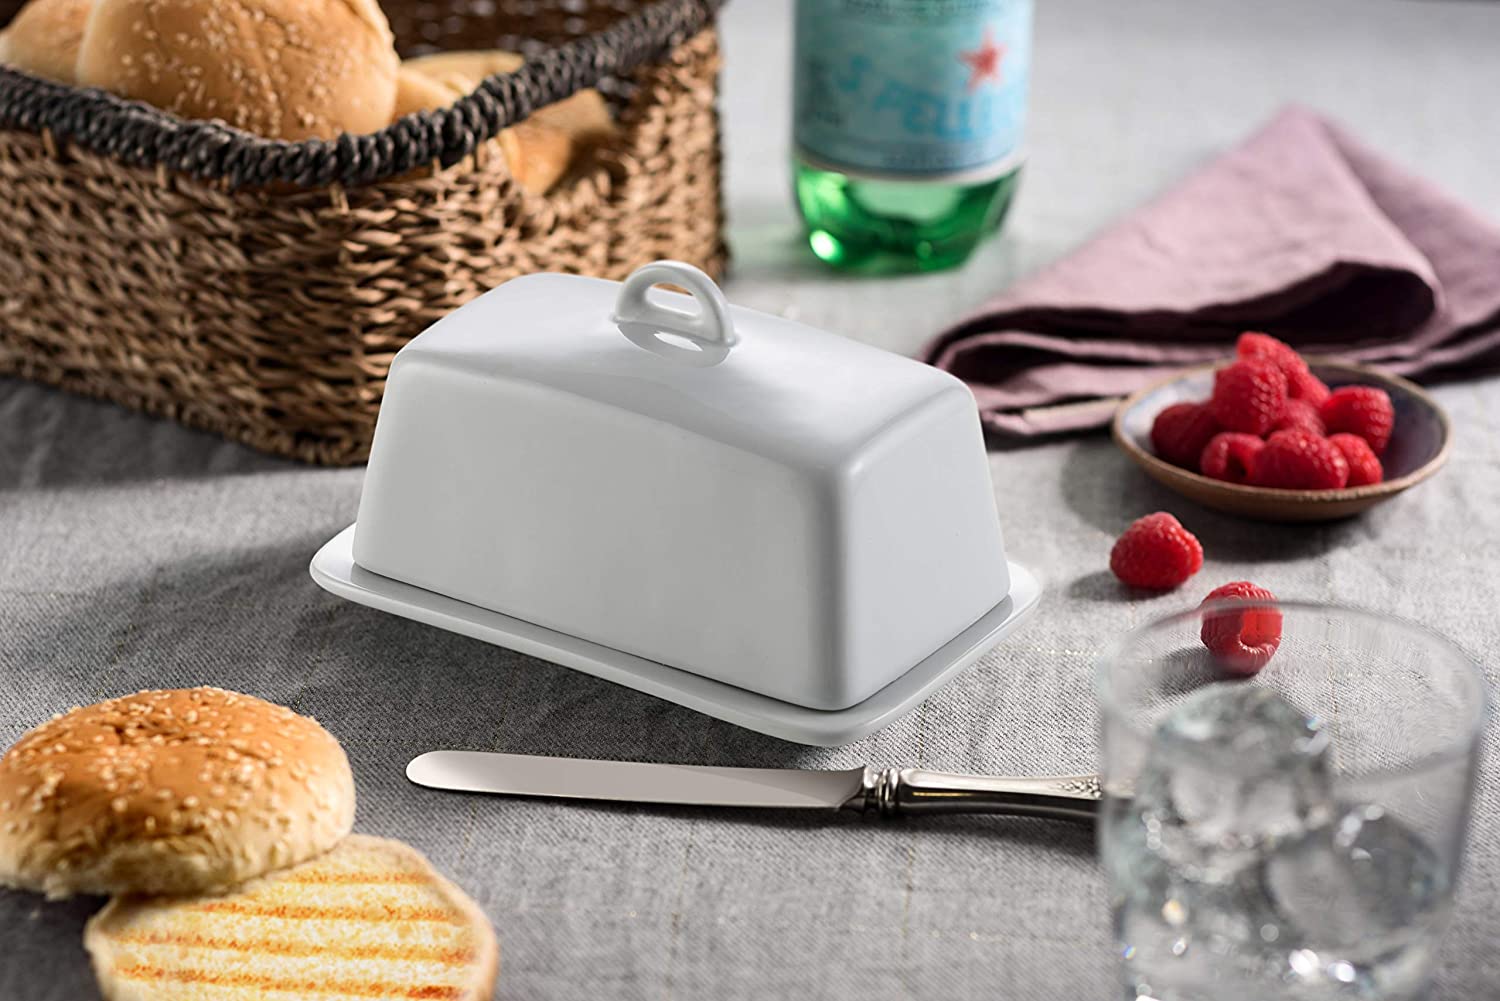 GOURMEX Large Butter Holder with Lid | Fits One Pound of Butter